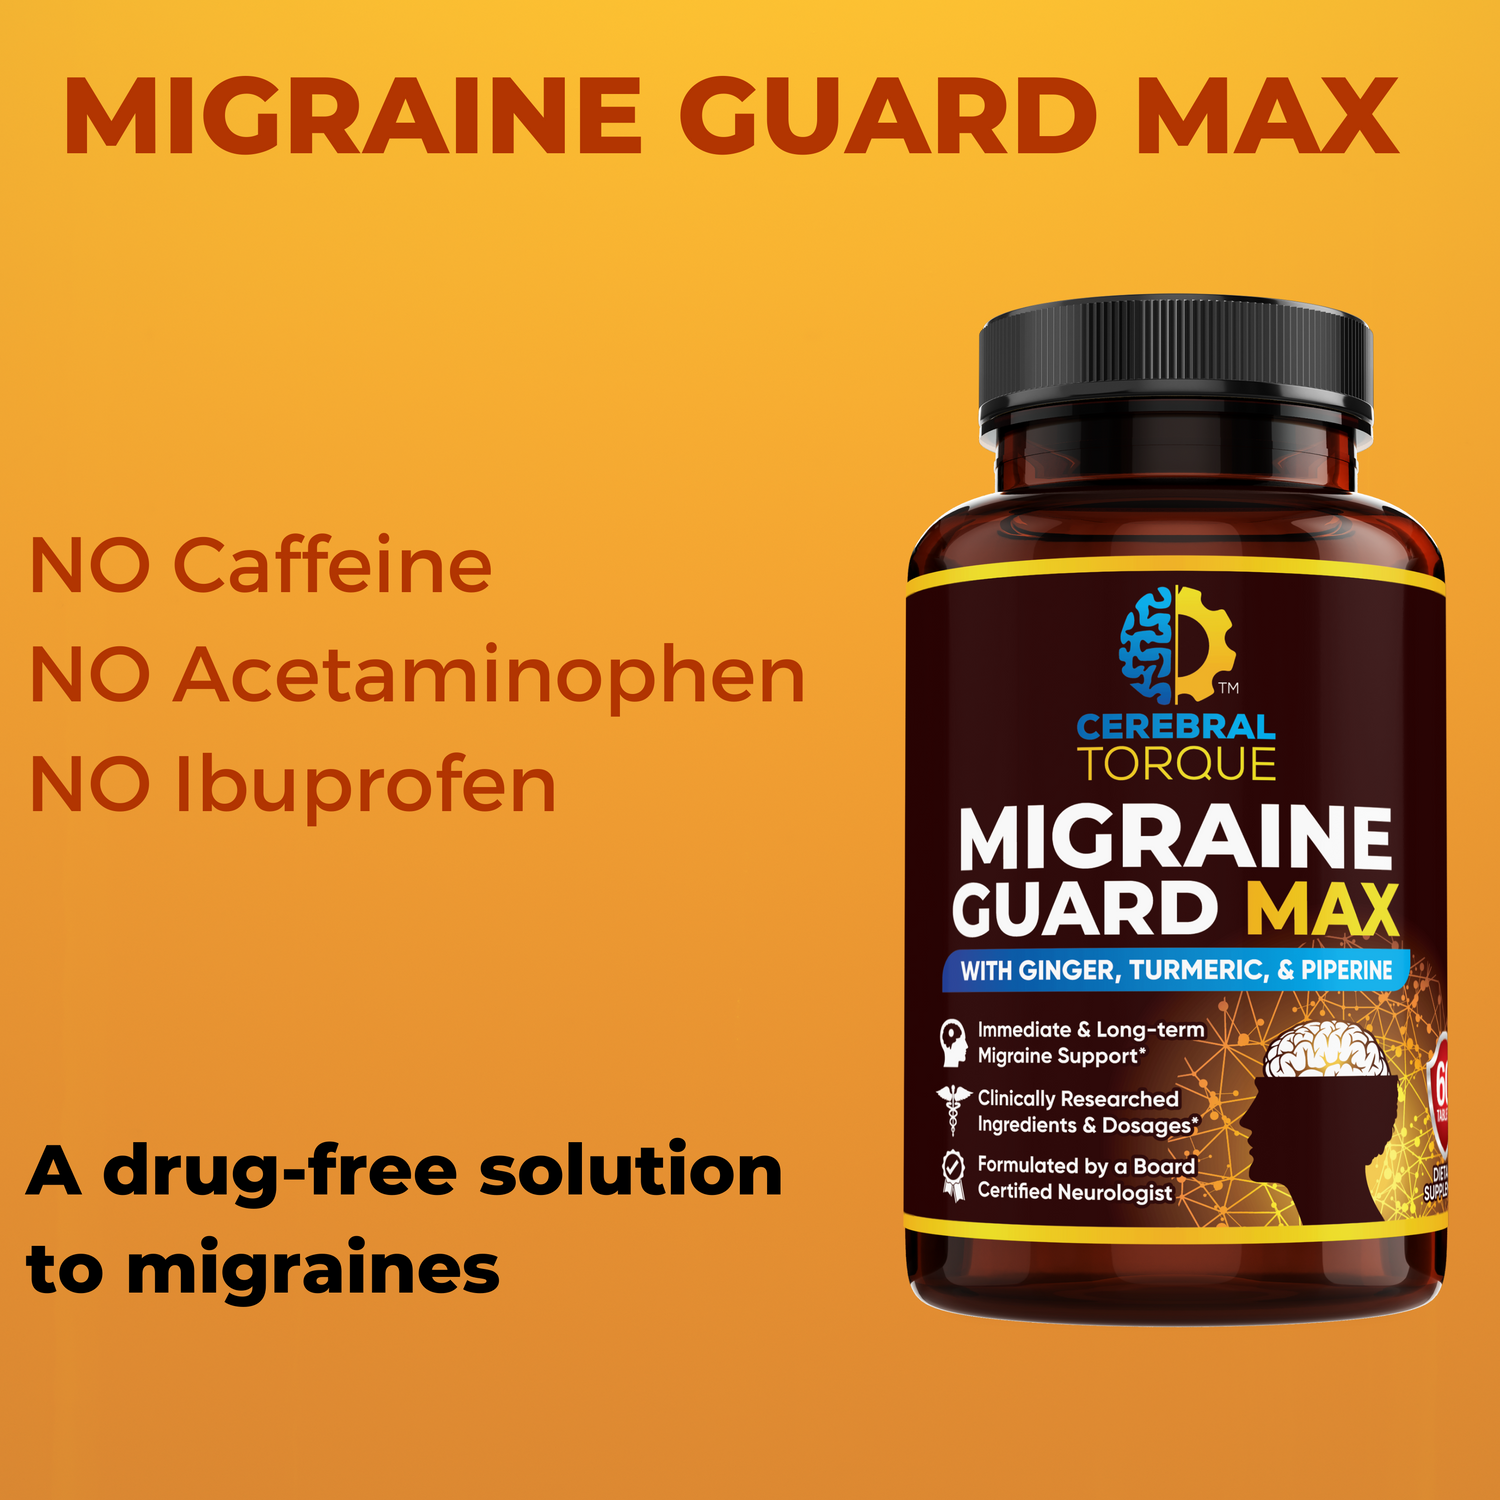 Migraine Guard MAX is an all-natural product. It contains NO caffeine, NO acetaminophen, and NO NSAIDs. No prescription required!